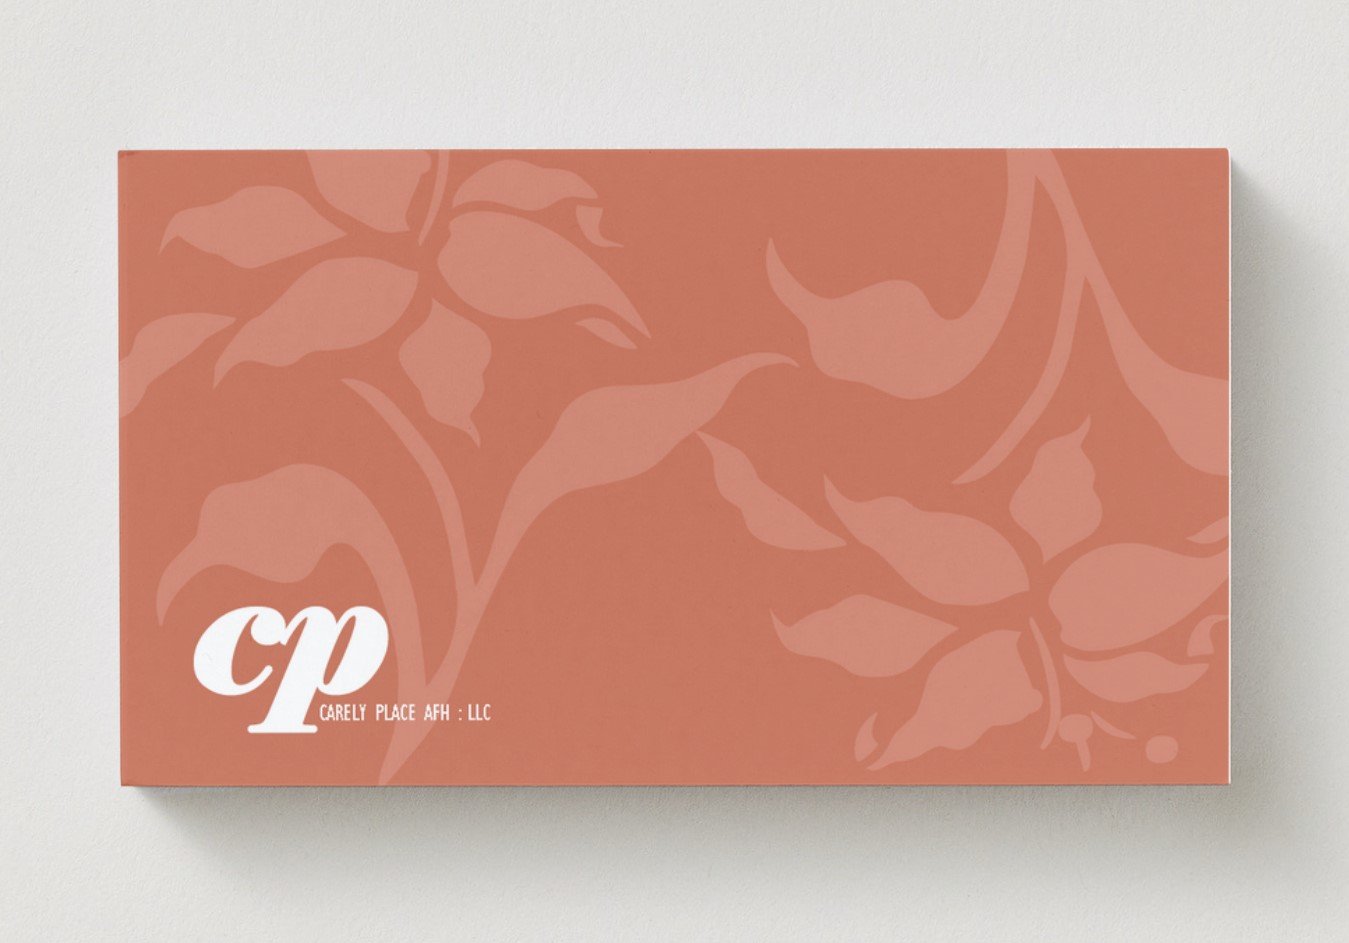 21051401 - Carely Place AFH - Business Cards  - Front.jpg